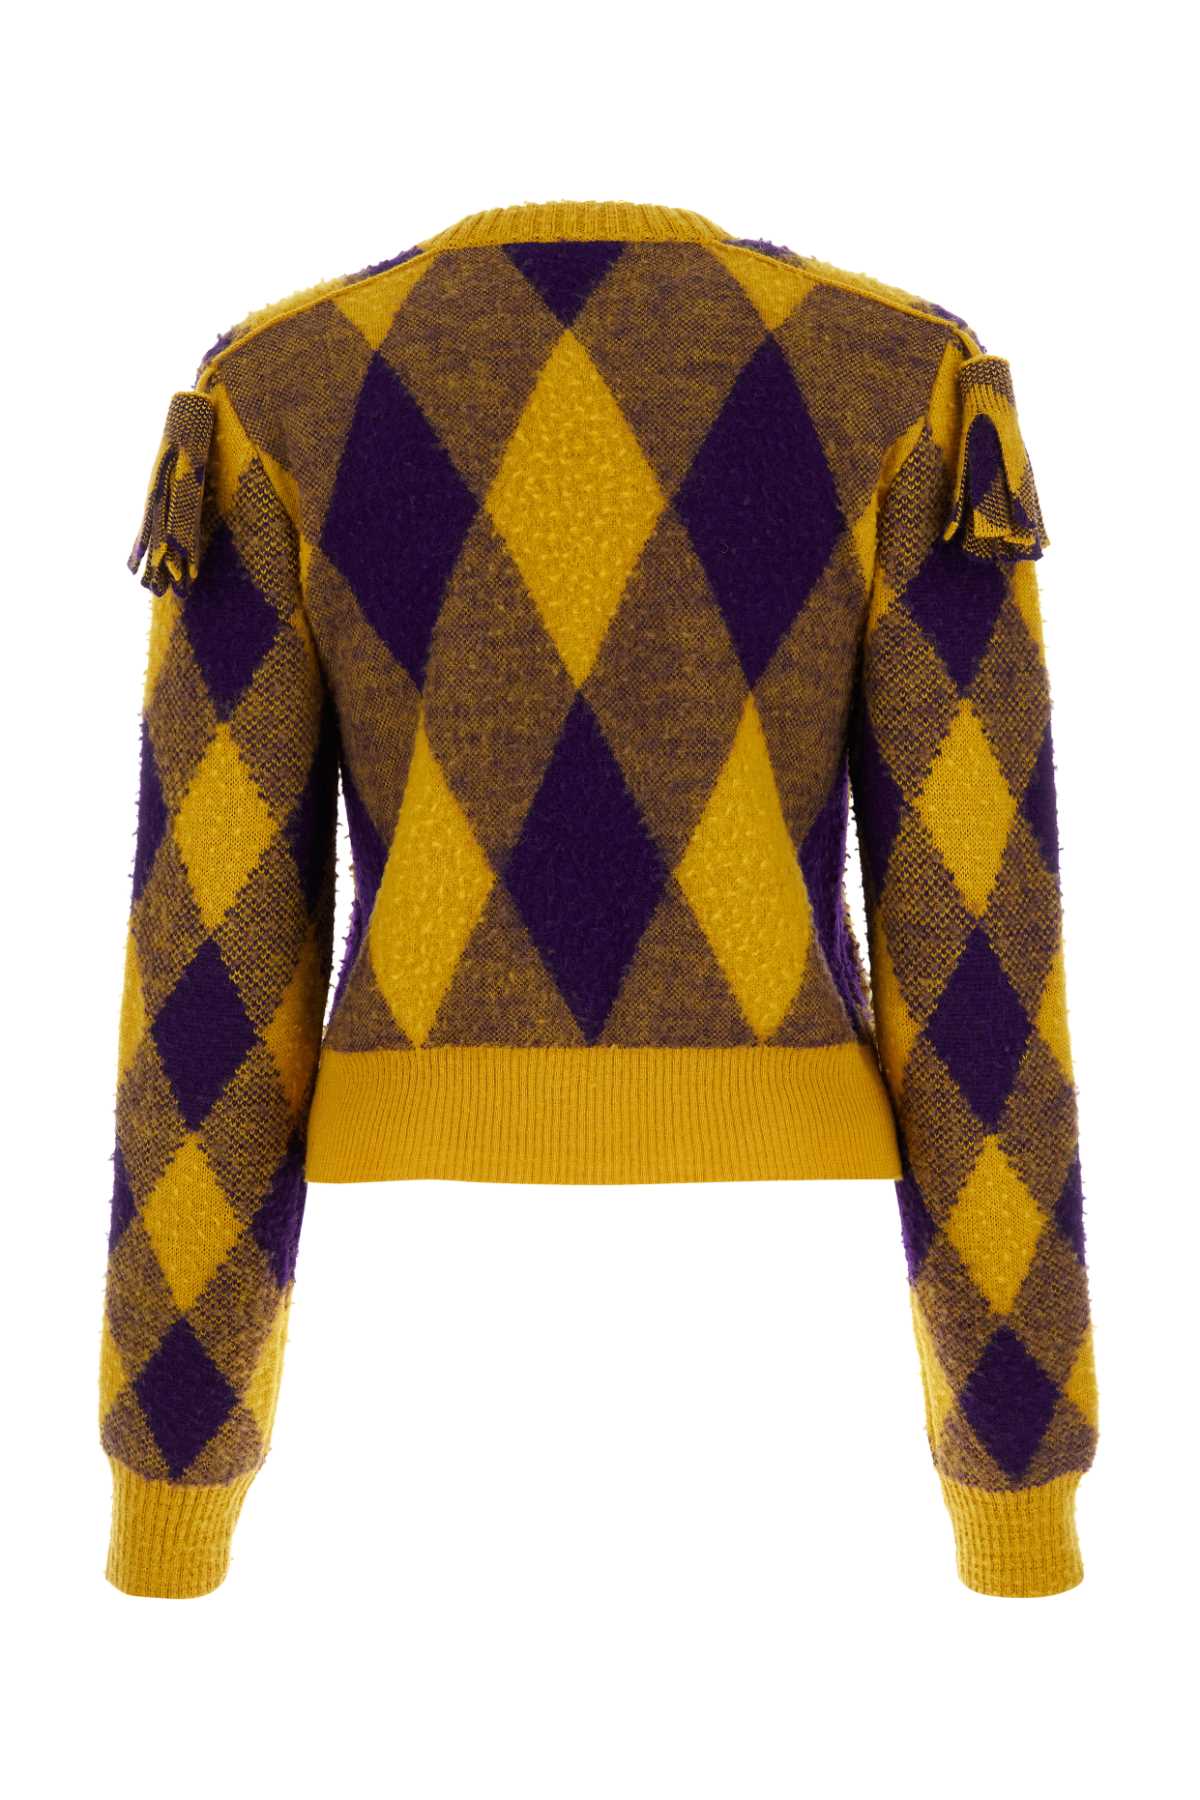 Burberry Embroidered Wool Jumper In Pearippattern